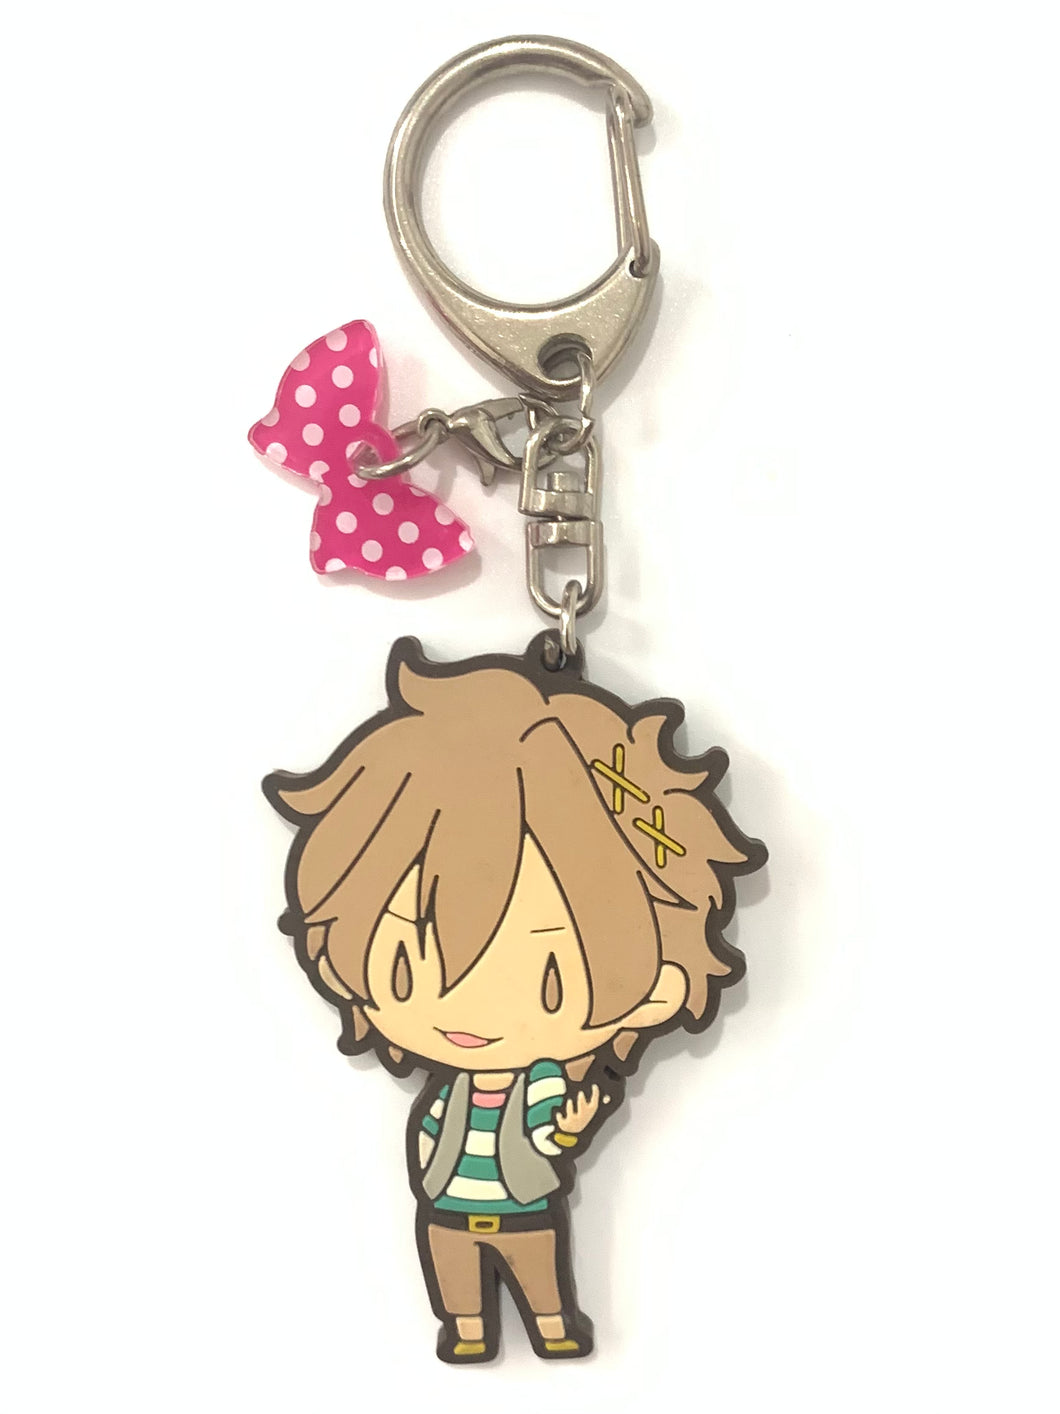 Brothers Conflict - Asahina Fuuto - Rubber Strap